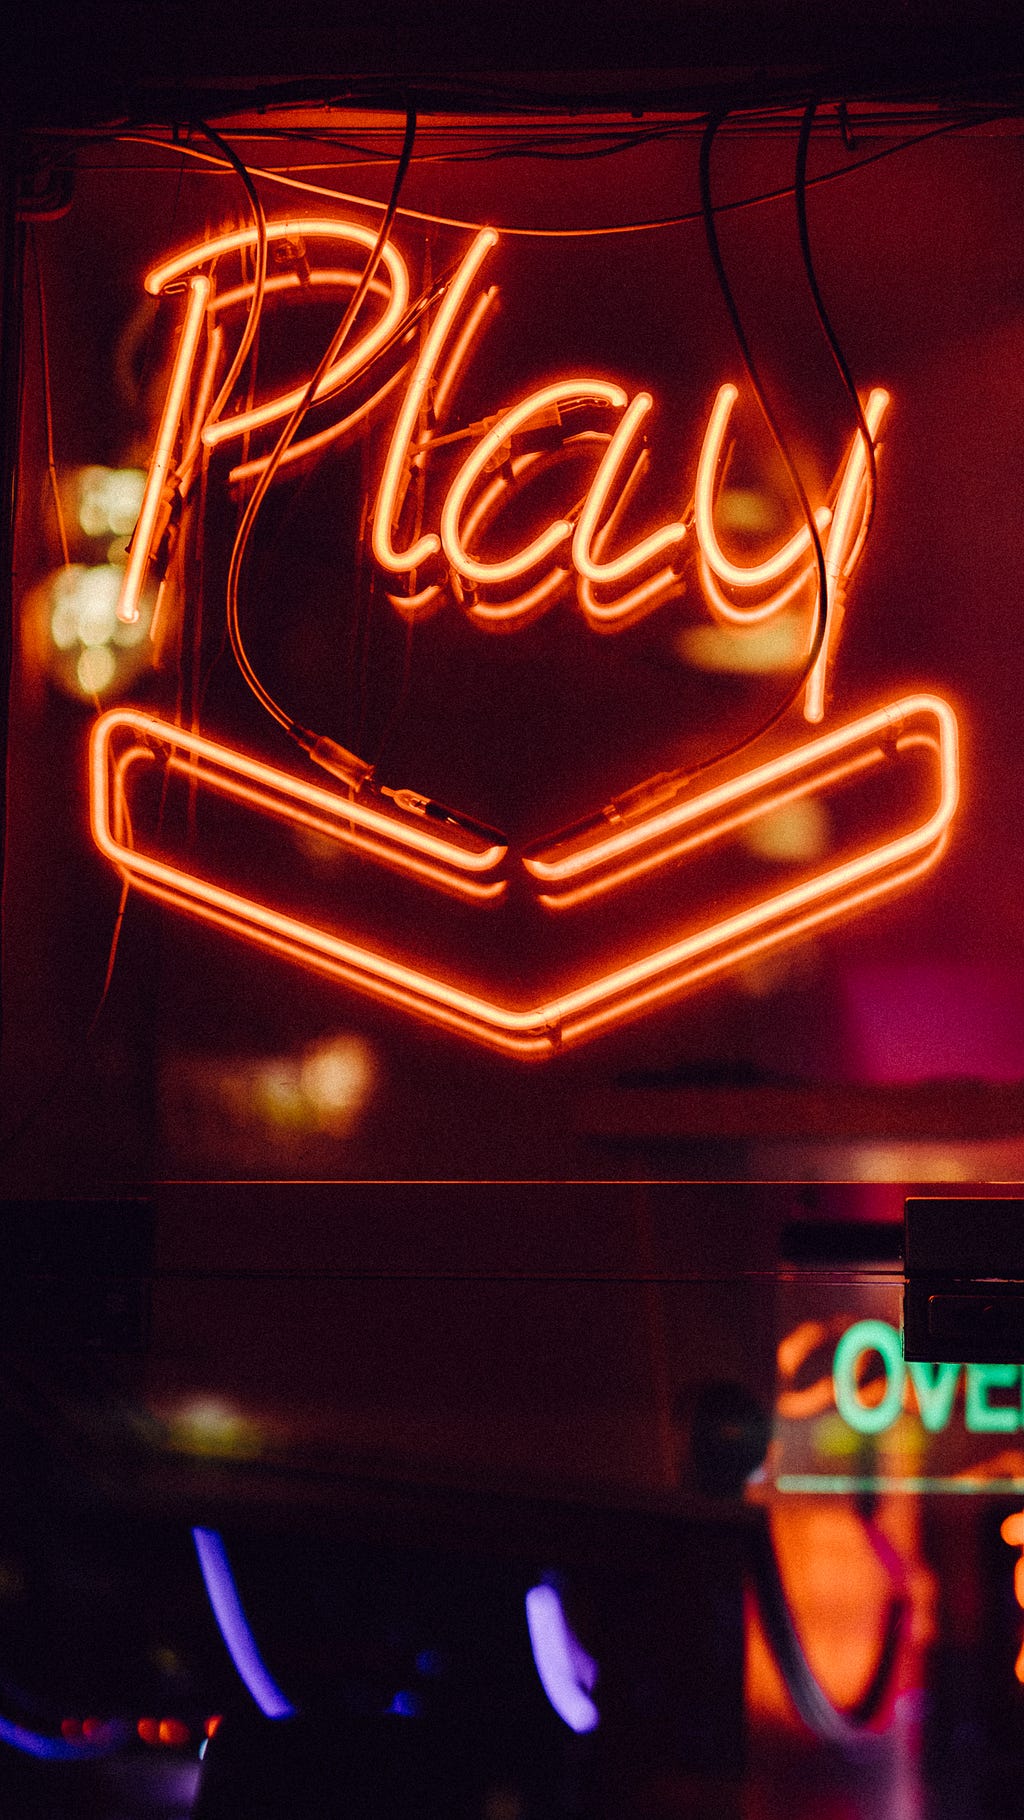 Neon sign that says “play”